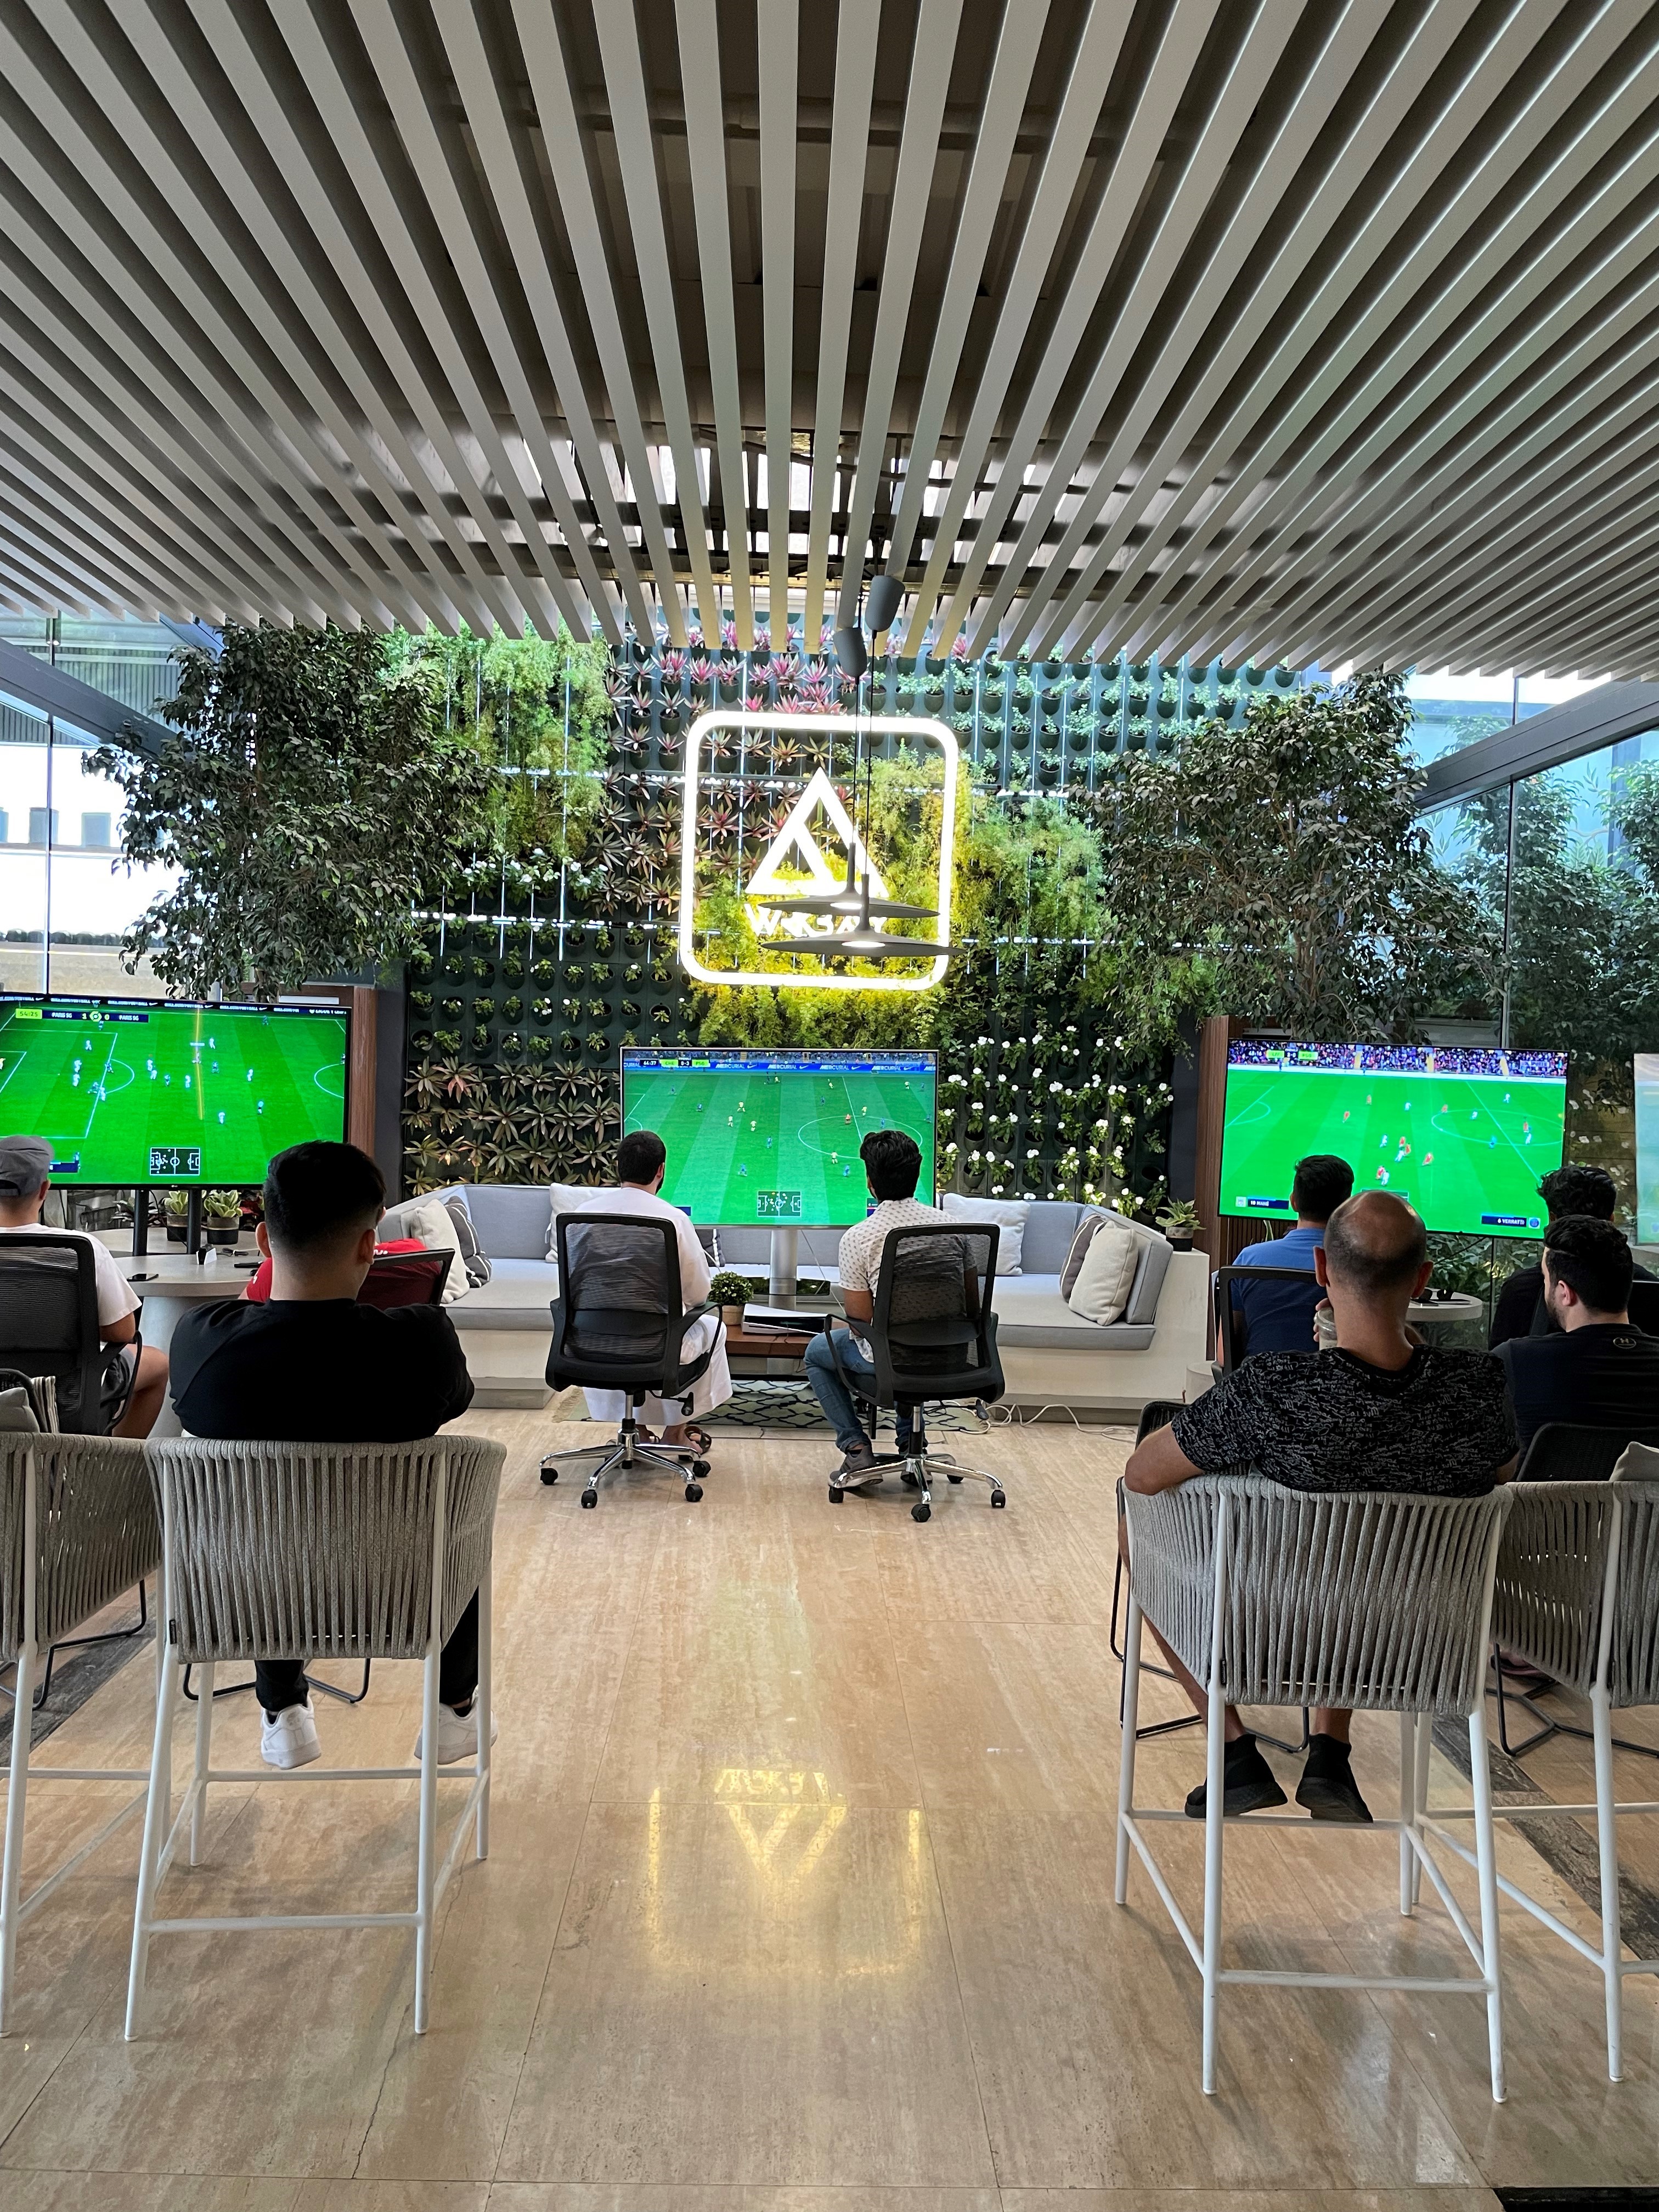 The stage is set for a FIFA22 Challenger Series on Playstation5 at WrkBay Co-working space & café